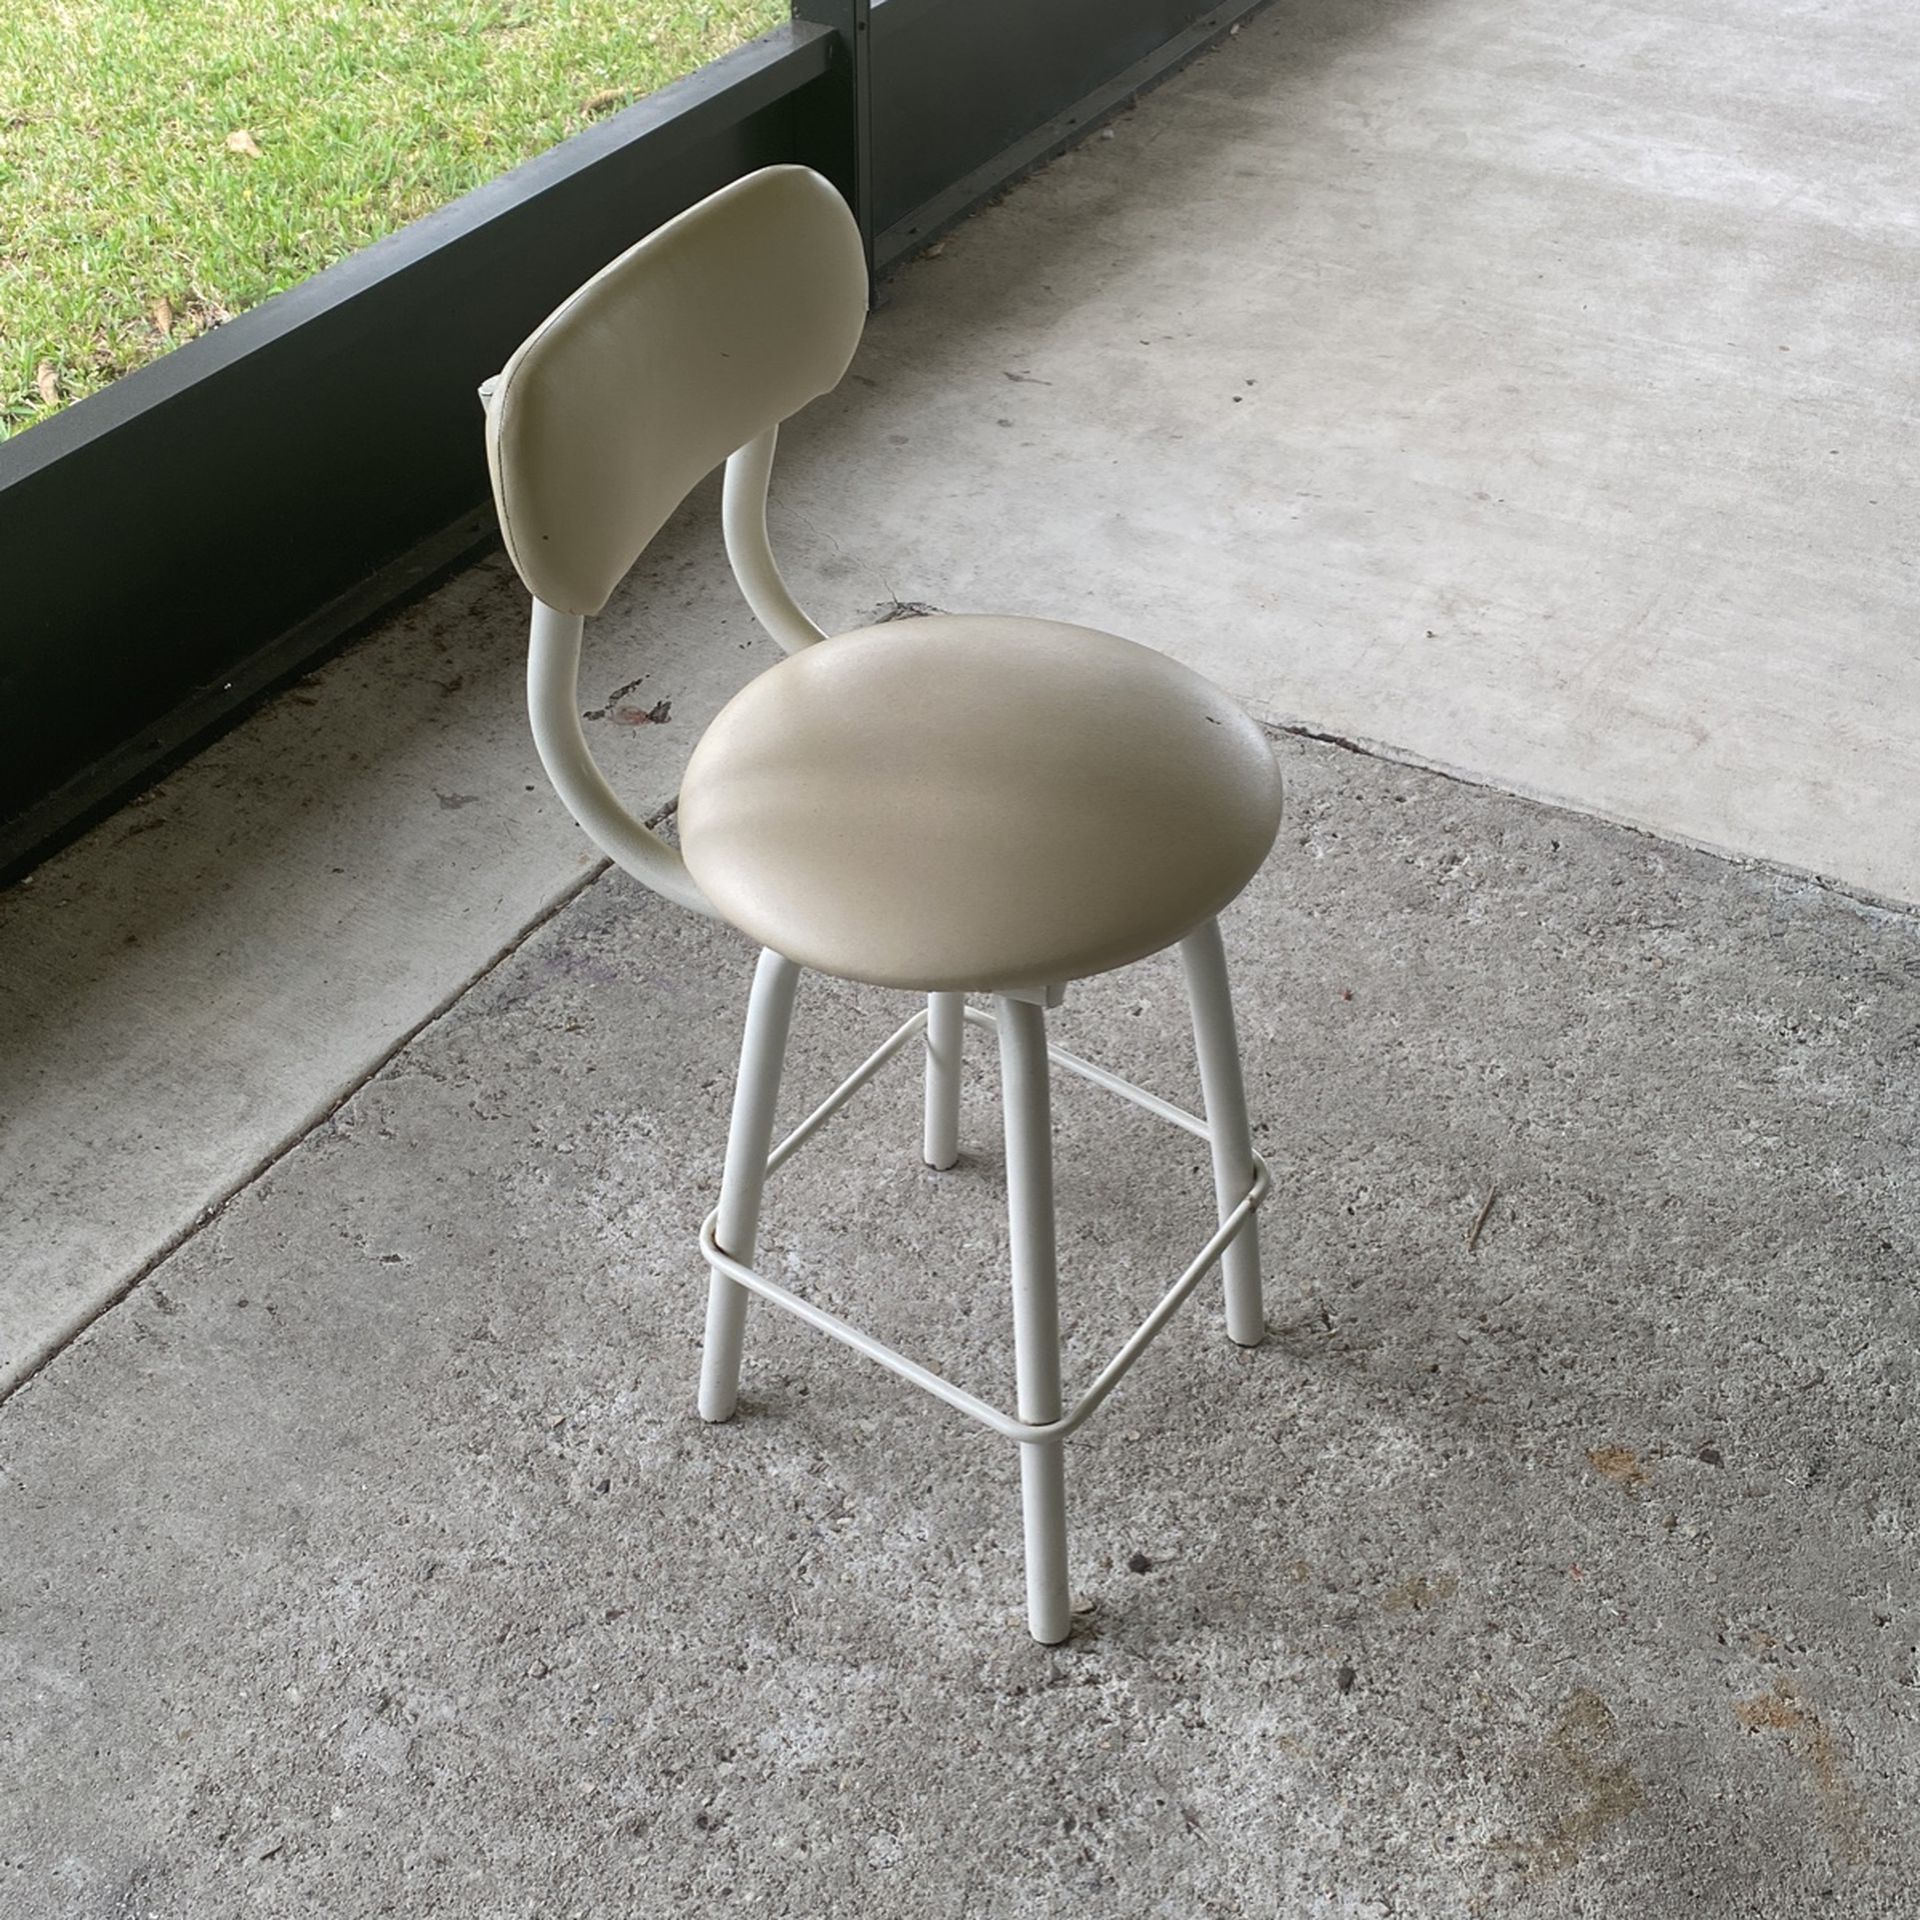 Small Stool With Back Support